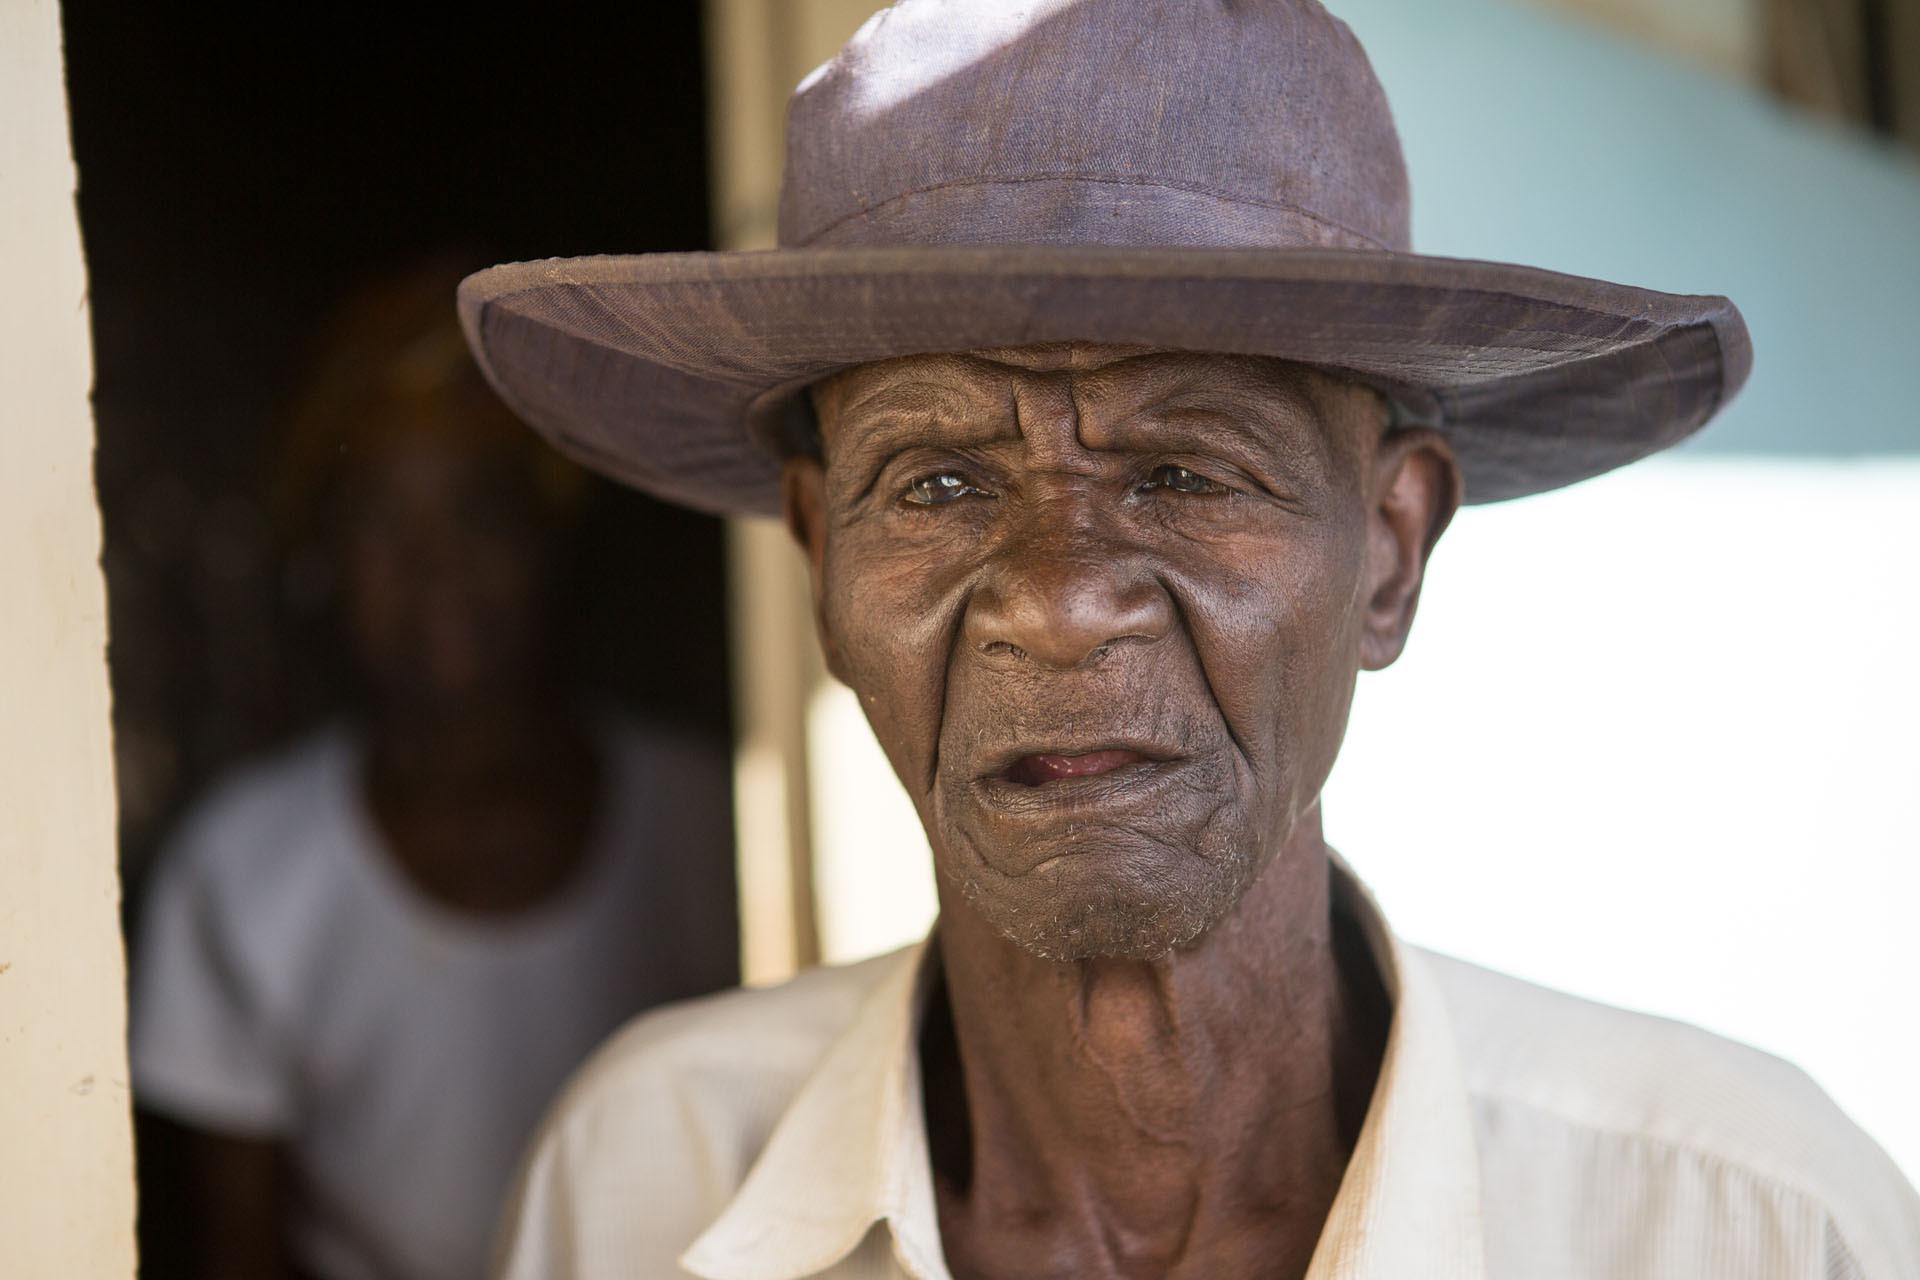 An old man in a rest home in Africa